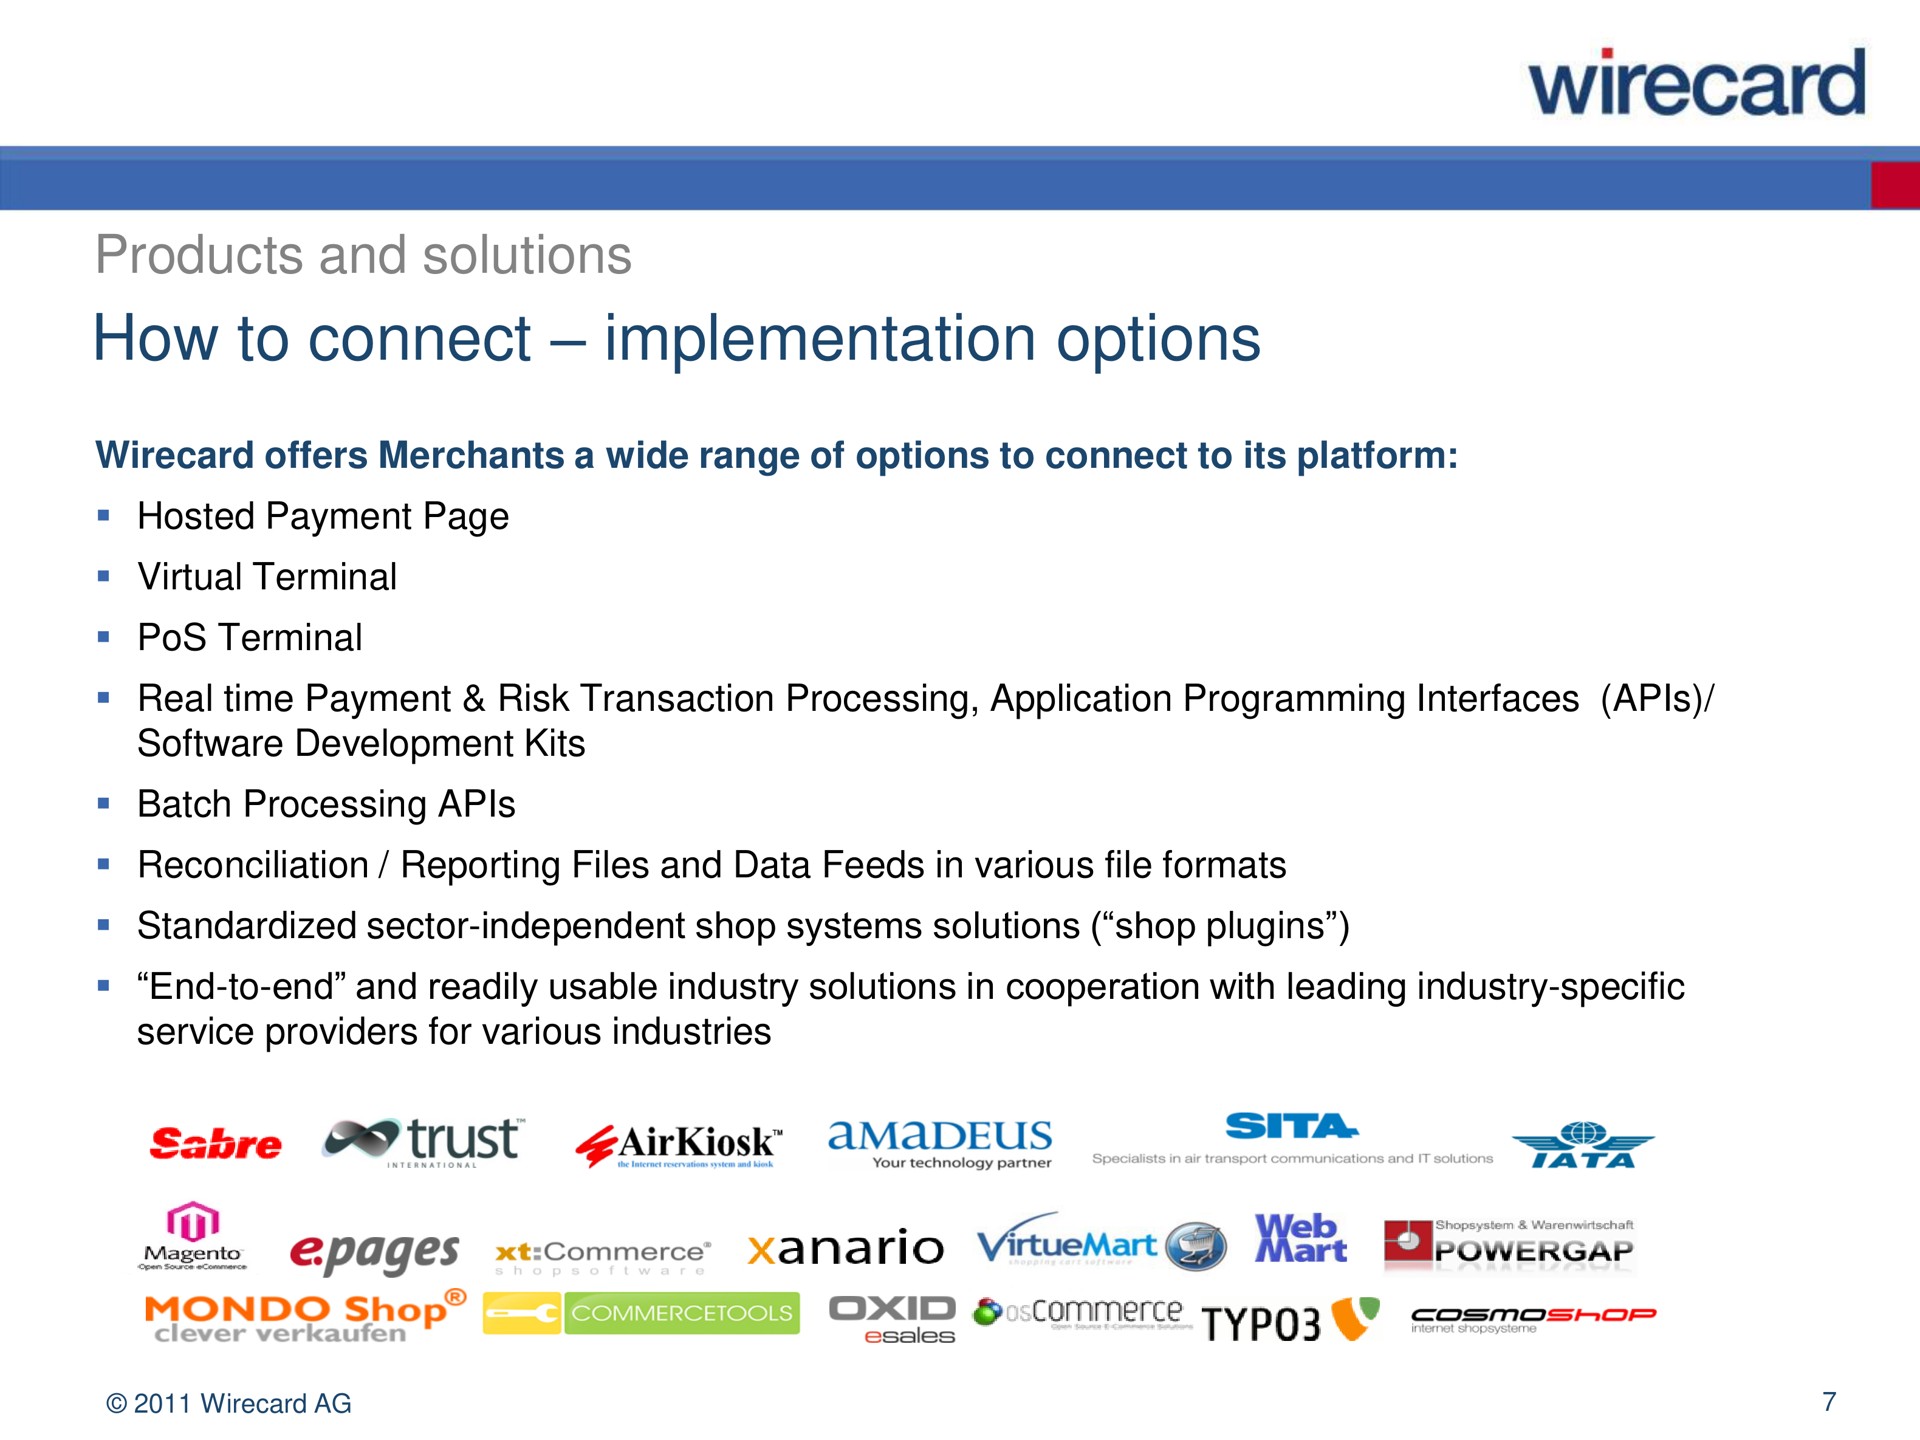 how to connect implementation options | Wirecard